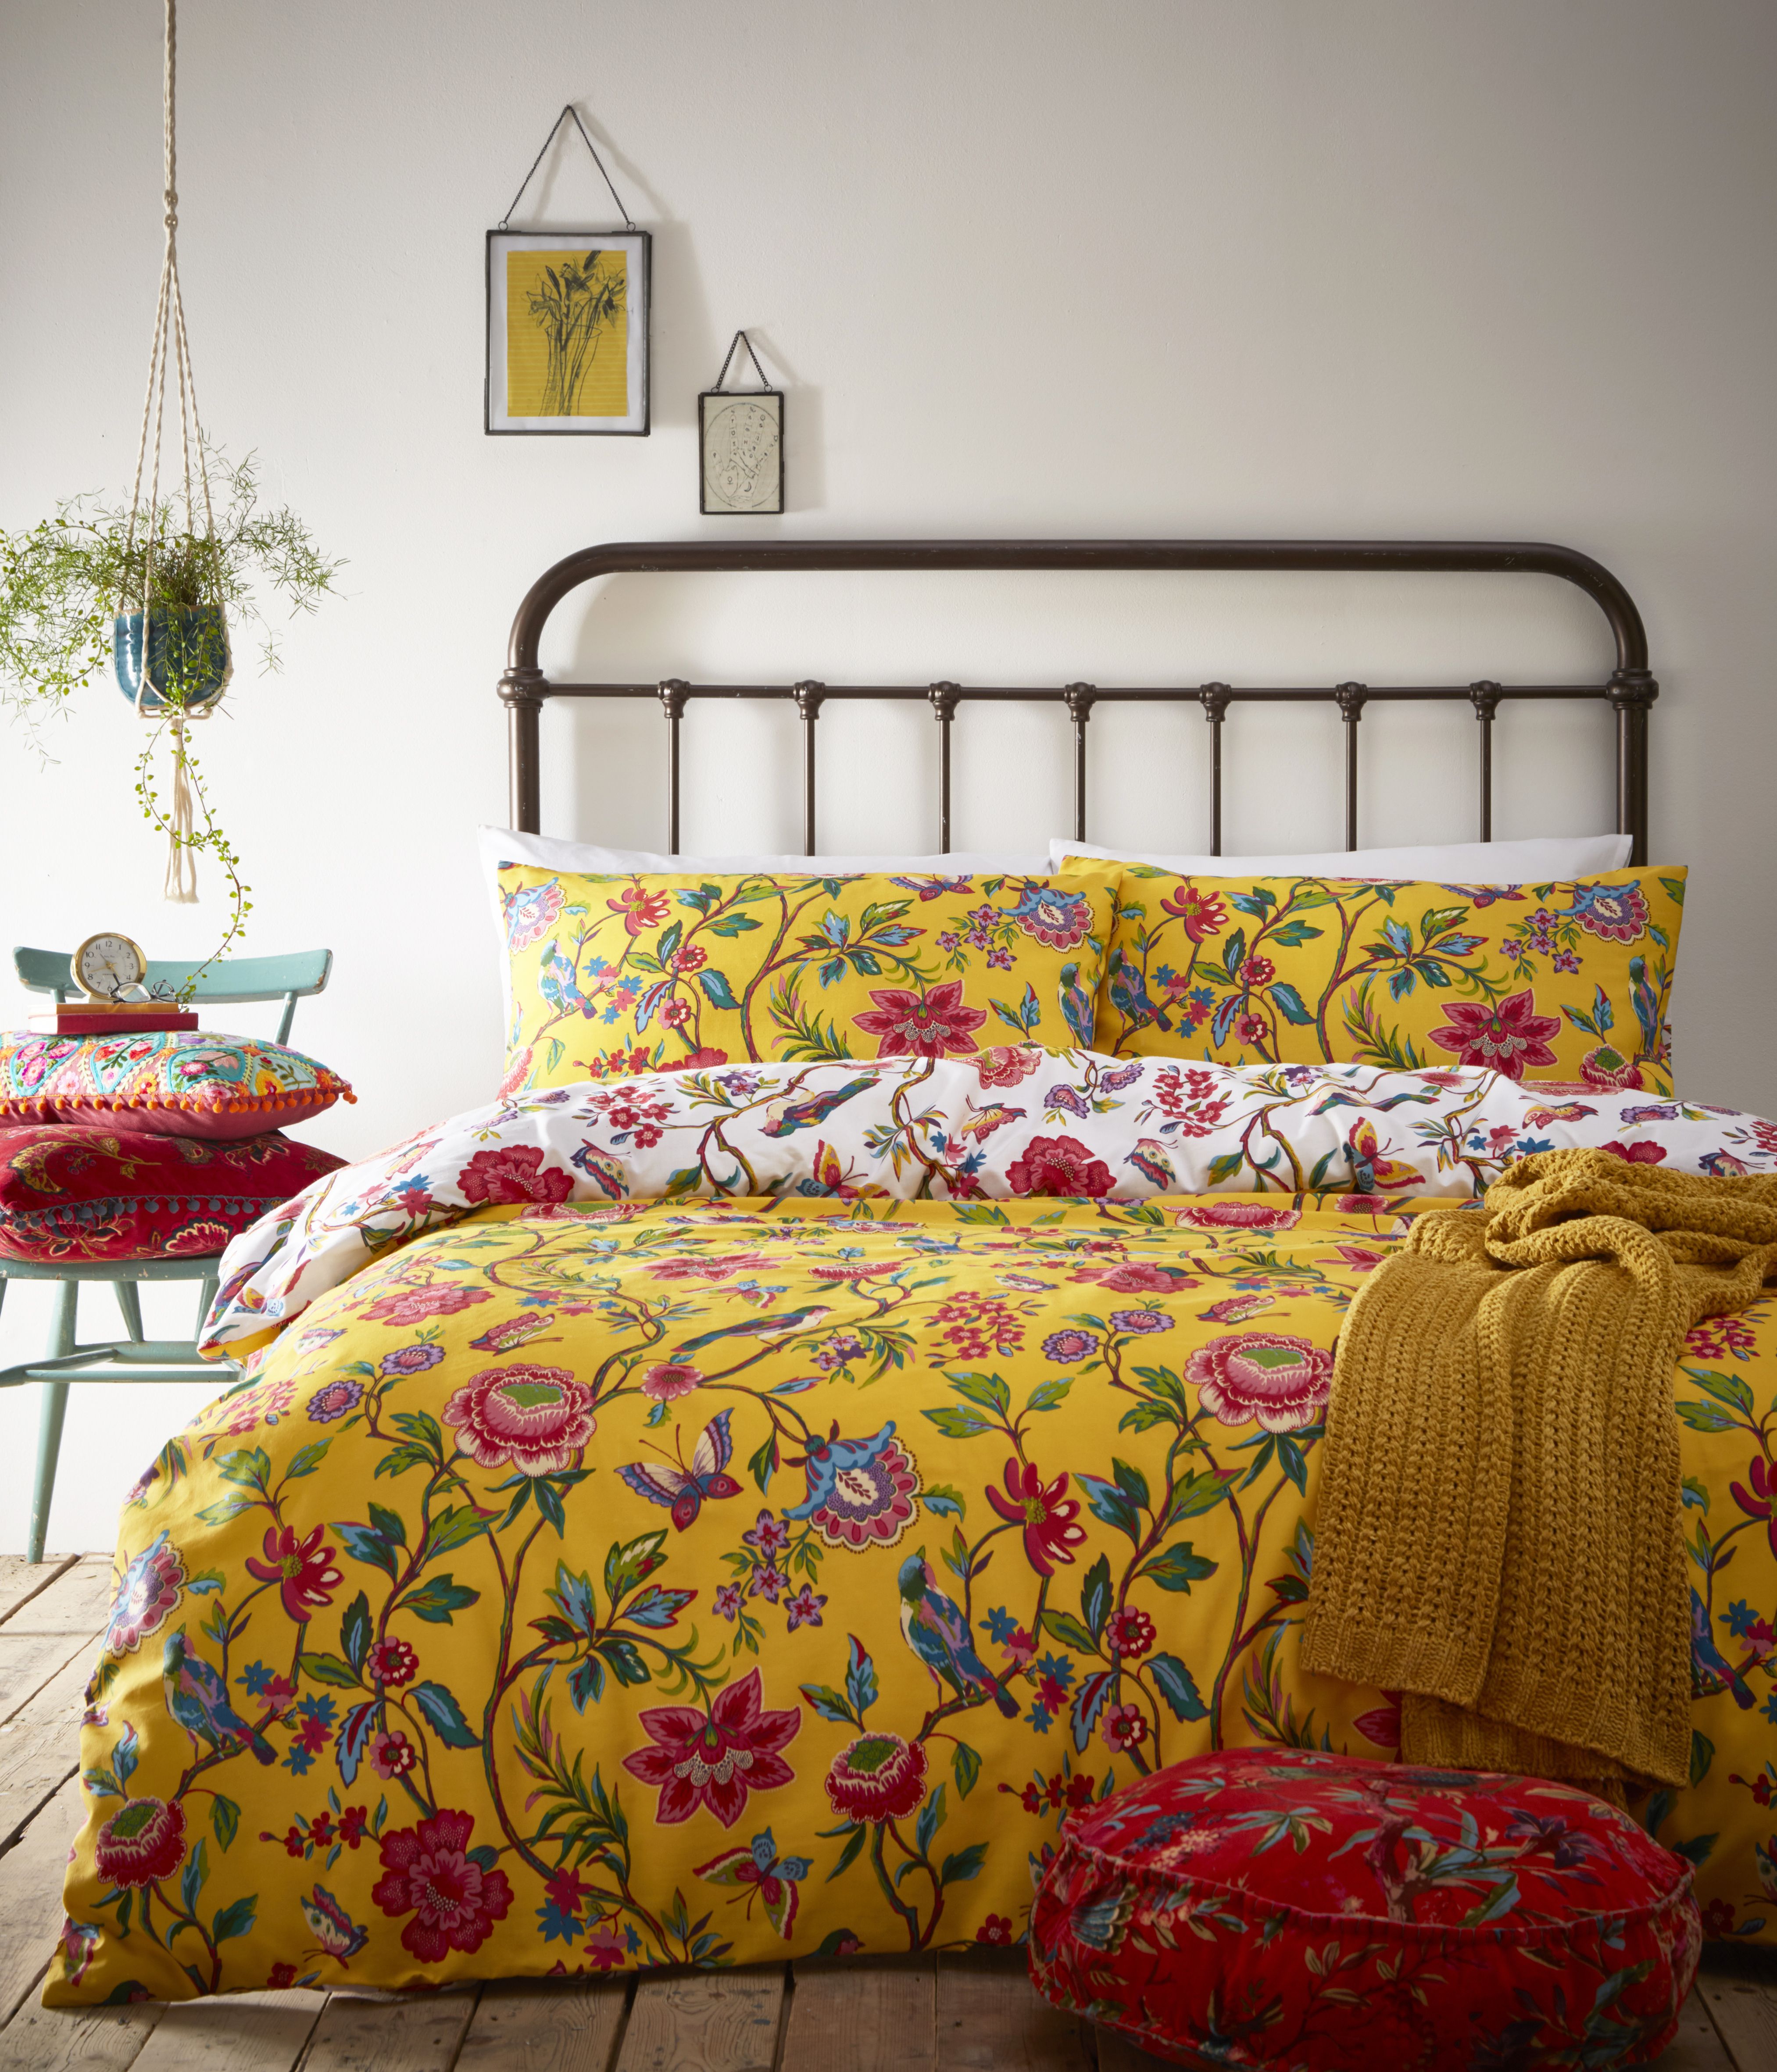 Bright colours will dominate this season and the Pomelo duvet cover set does more than deliver, it exceeds expectations. Beautifully patterned with a mirage of brightly coloured tropical birds, butterflies and flowers it’s a fun and unique piece. Named after the Pomelo fruit which is a large, yellow citrus fruit native to South and Southeast Asia this duvet set reflects this fruit’s natural vivid colouring. The vibrant display reverses onto a white background with an equally detailed print of botanicals. Available in two brilliant colours each duvet set comes with fully matching housewife pillowcases. Made of crisp polycotton making this duvet set soft and hard-wearing. This duvet cover features a secure button closure while the pillowcases have an envelope closure. Machine washable on a 40 degree cycle. Iron cool and tumble dry on a low setting for the best finish.